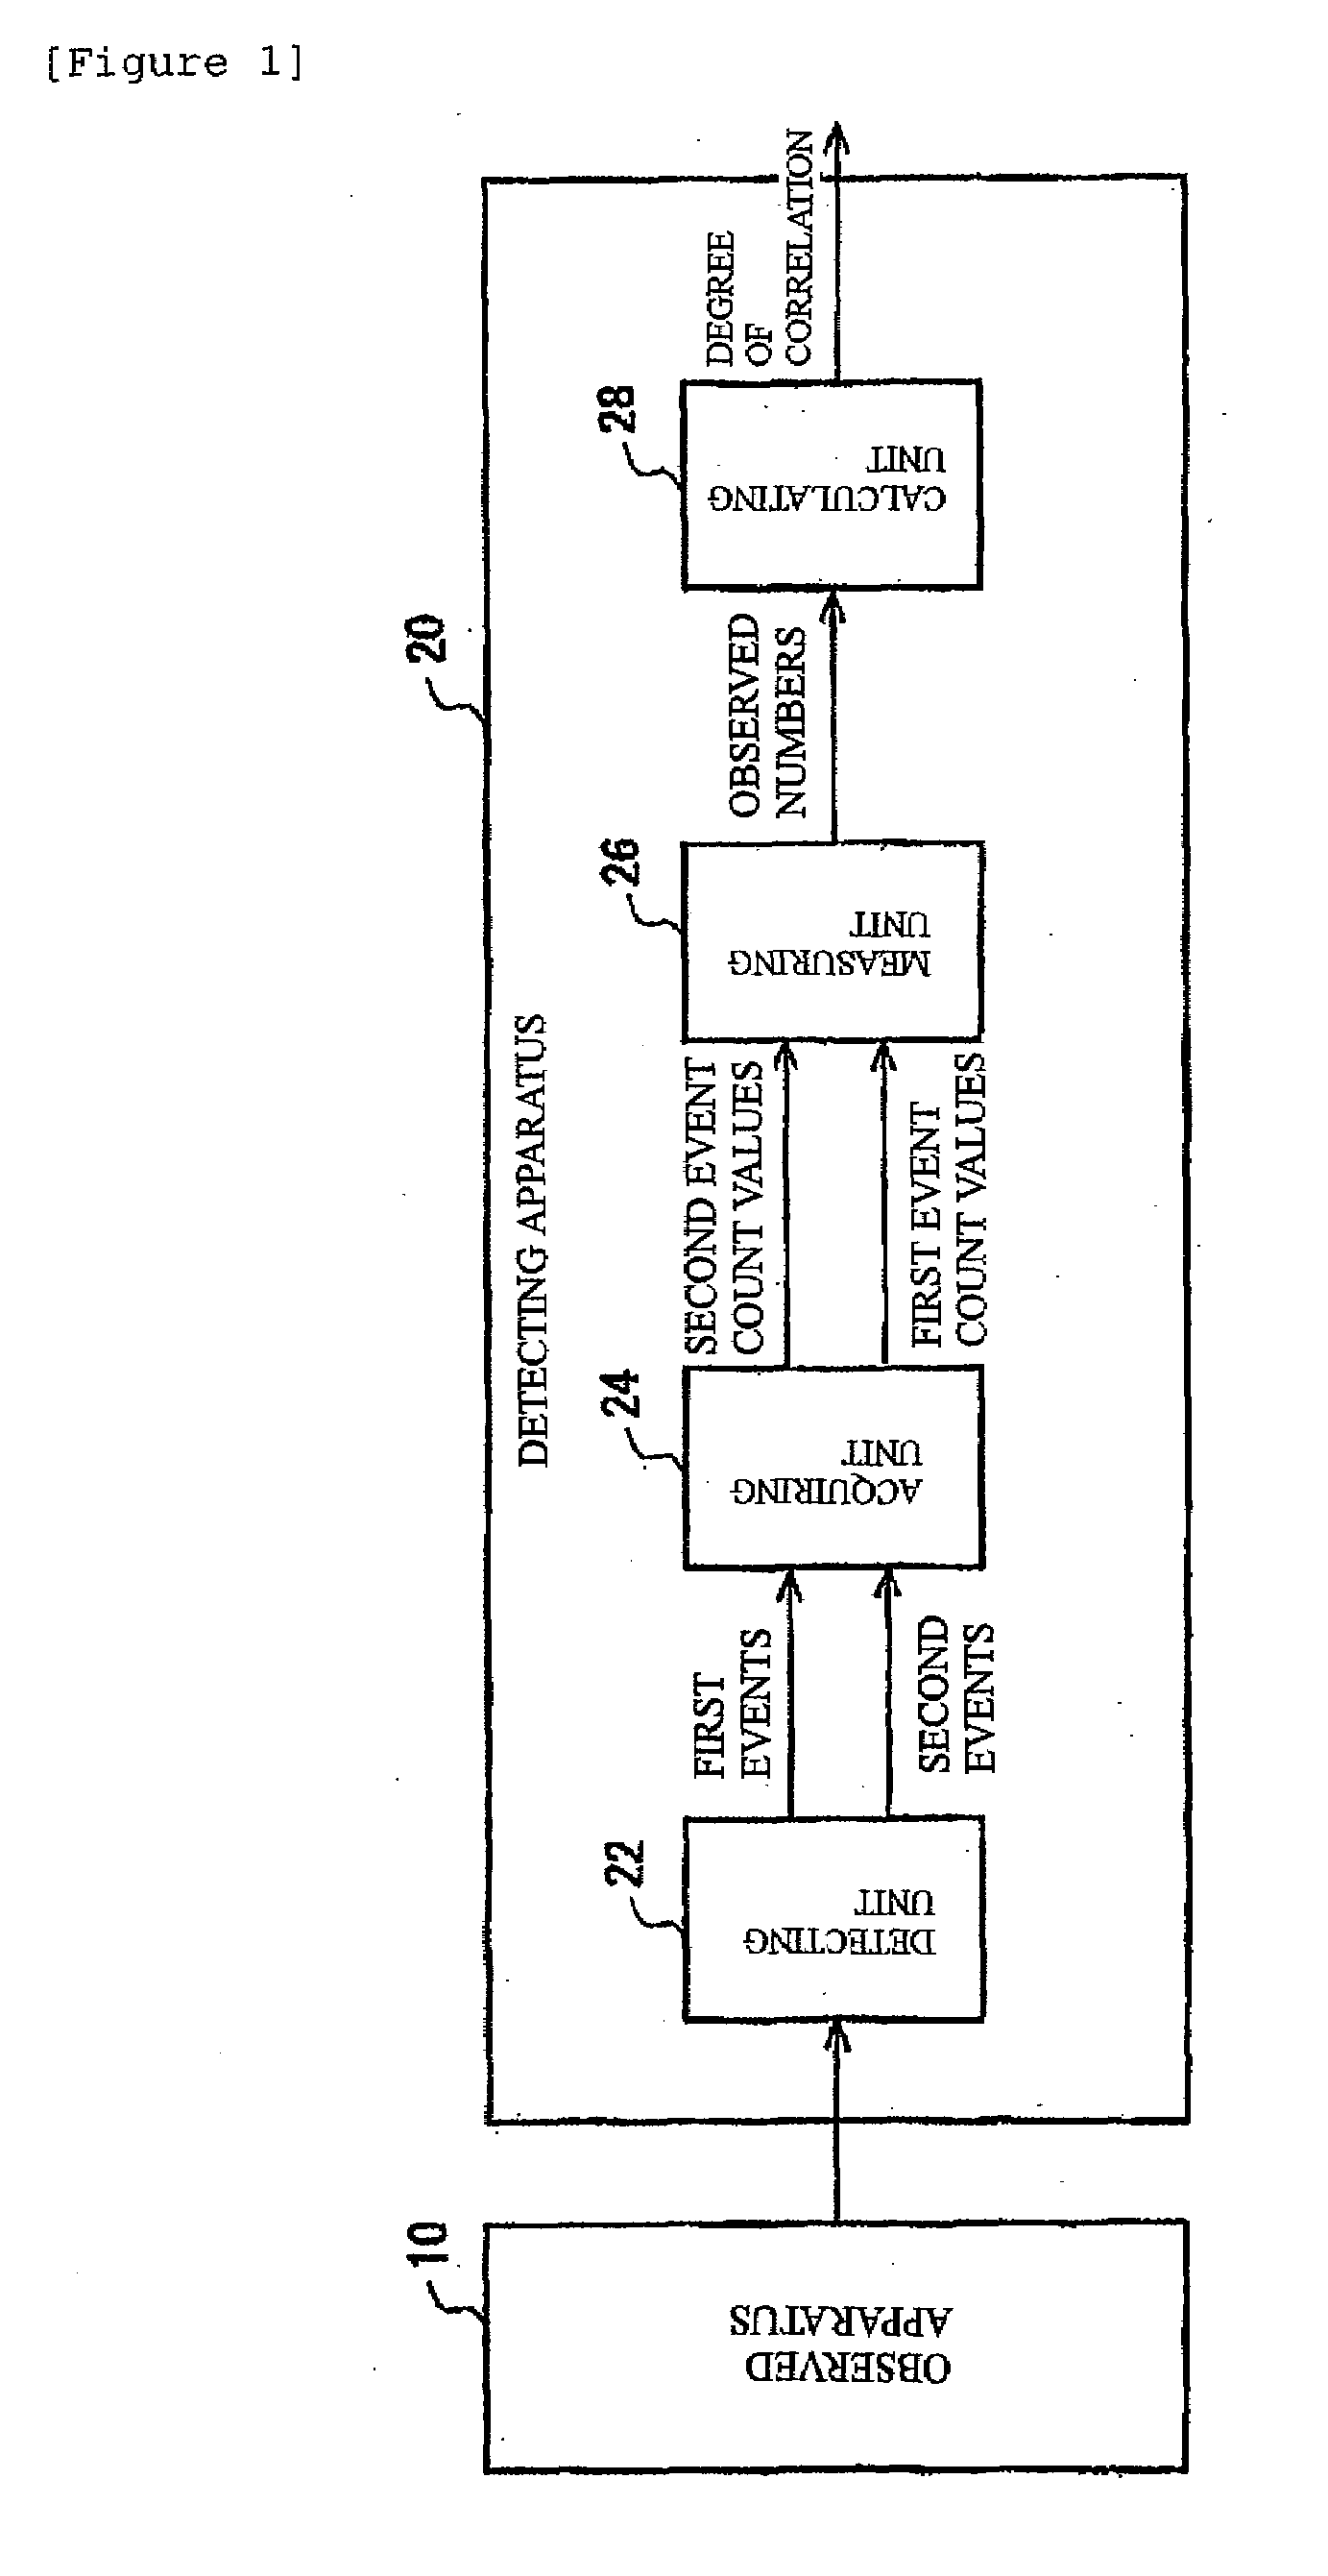 Method, Apparatus, and Program for Detecting the Correlation Between Repeating Events